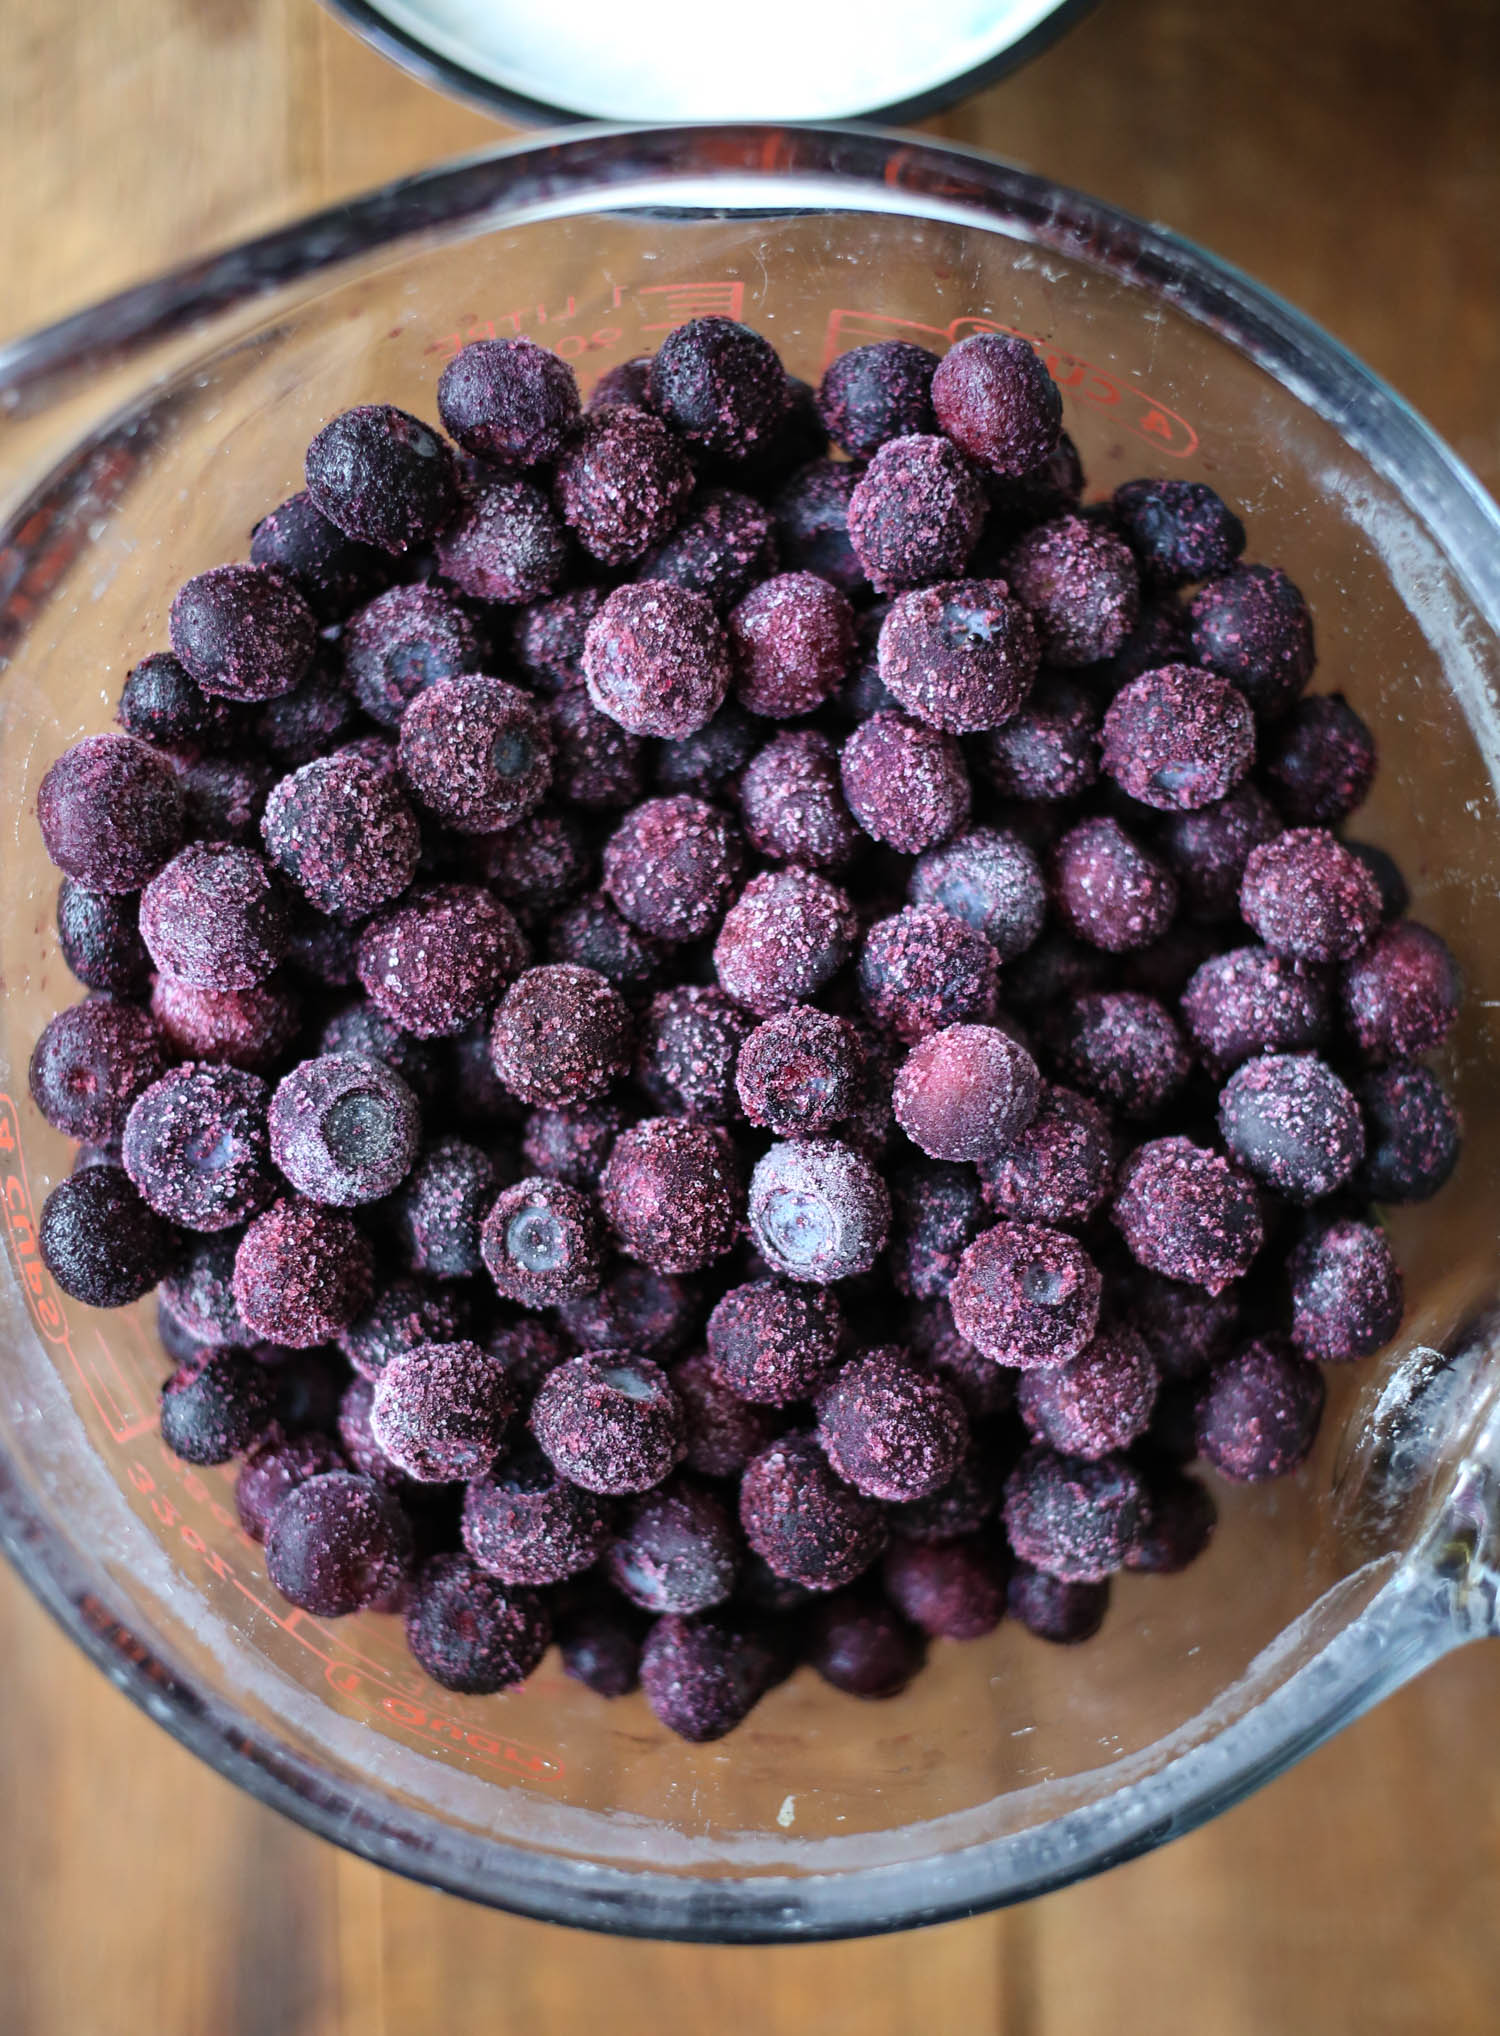 blueberries for Blueberry Grunt from Our Best Bites